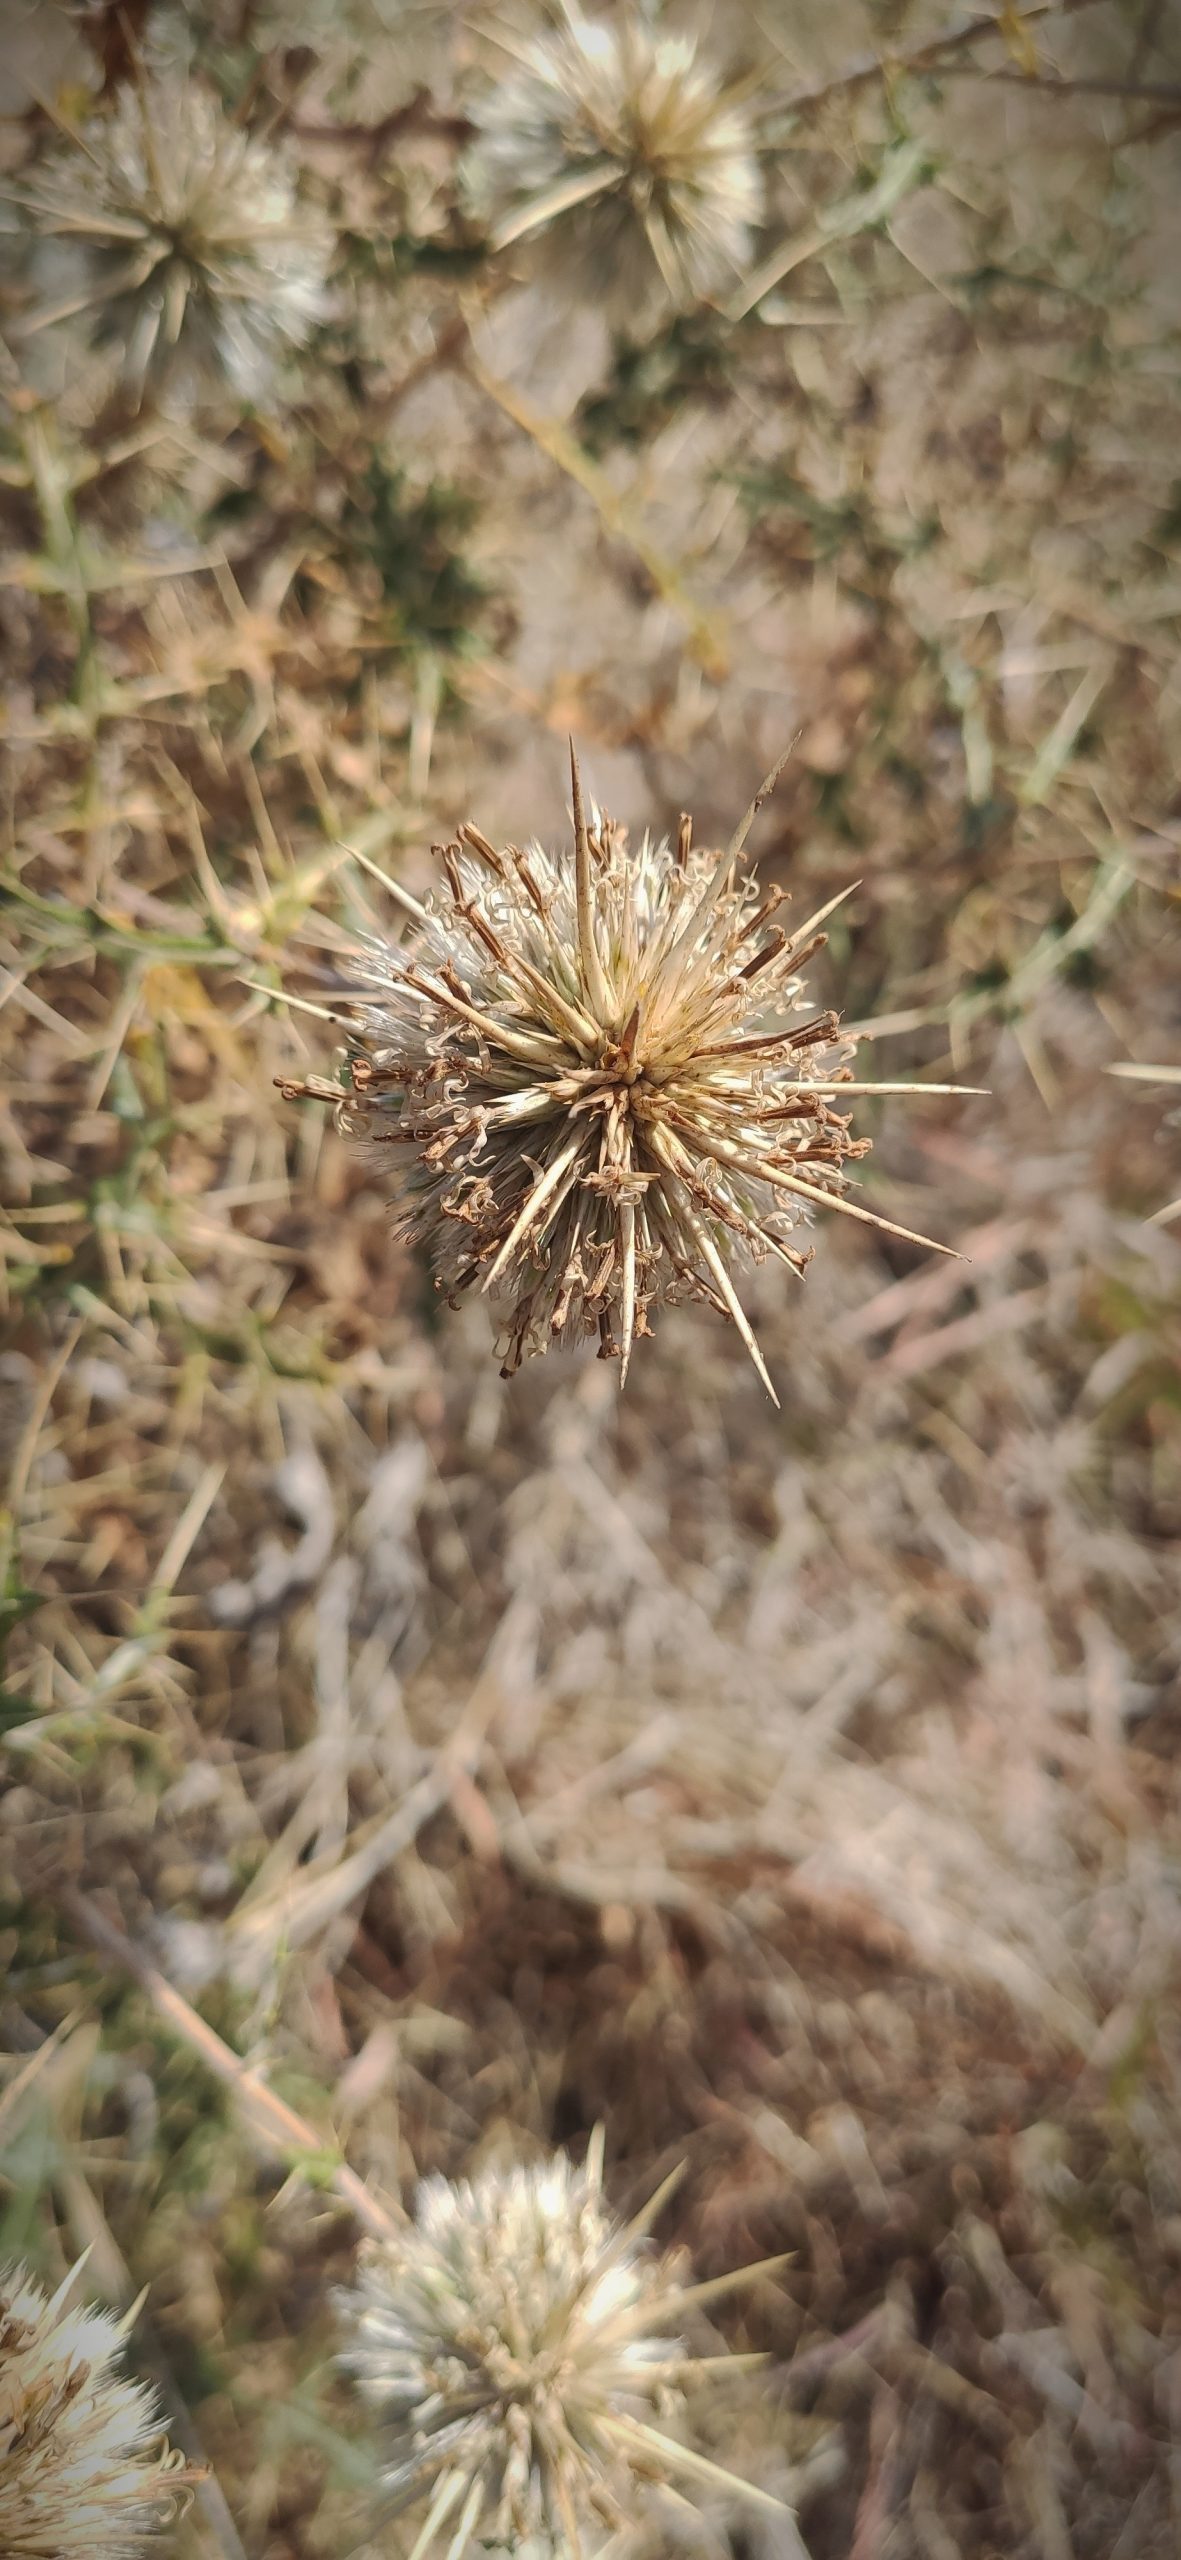 Thorny plant in the farm